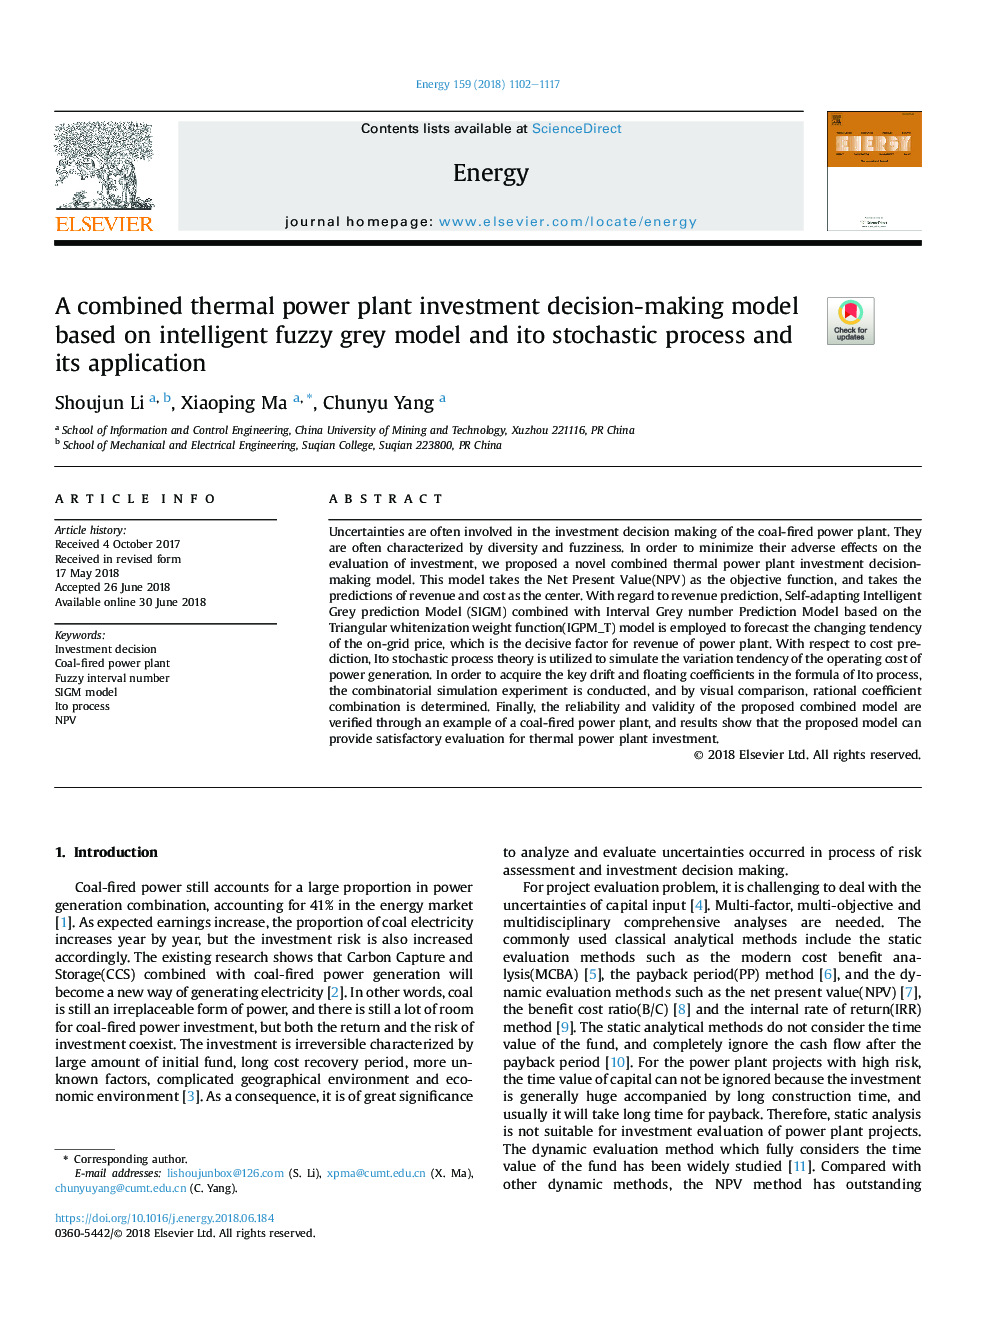 A combined thermal power plant investment decision-making model based on intelligent fuzzy grey model and ito stochastic process and its application